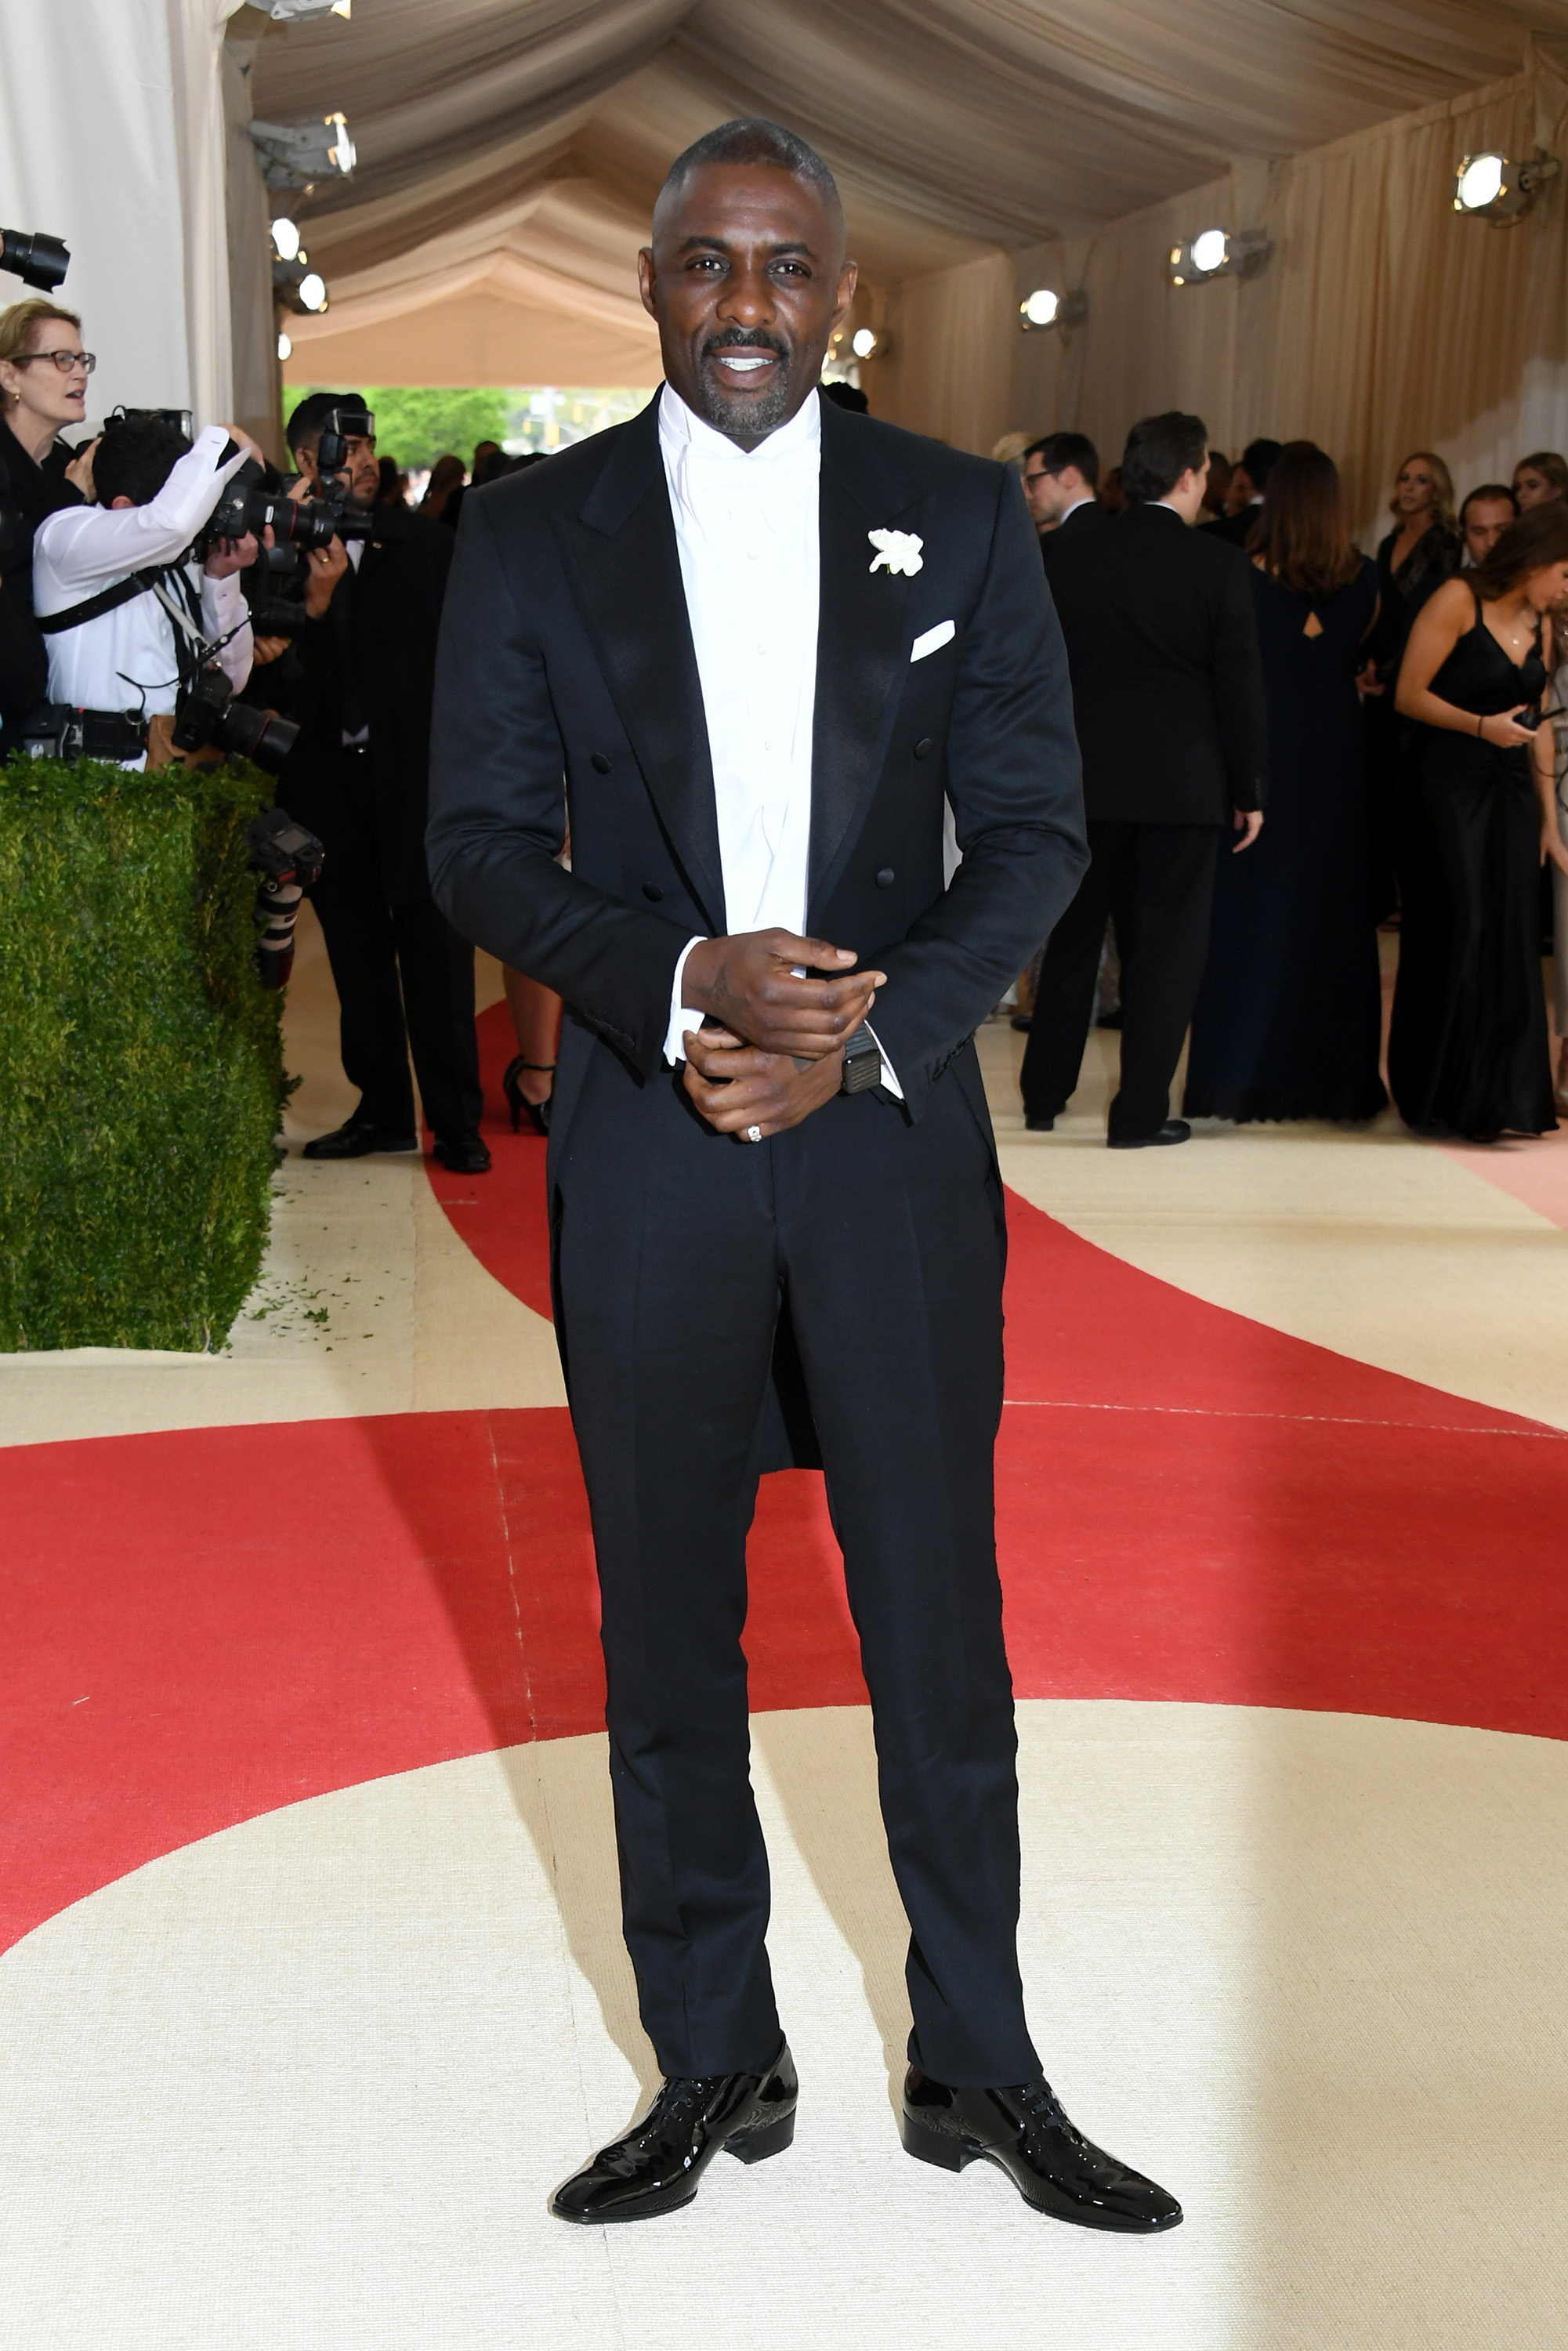 Idris Elba attends "Manus x Machina: Fashion In An Age Of Technology" Costume Institute Gala at Metropolitan Museum of Art on May 2, 2016 in New York City.